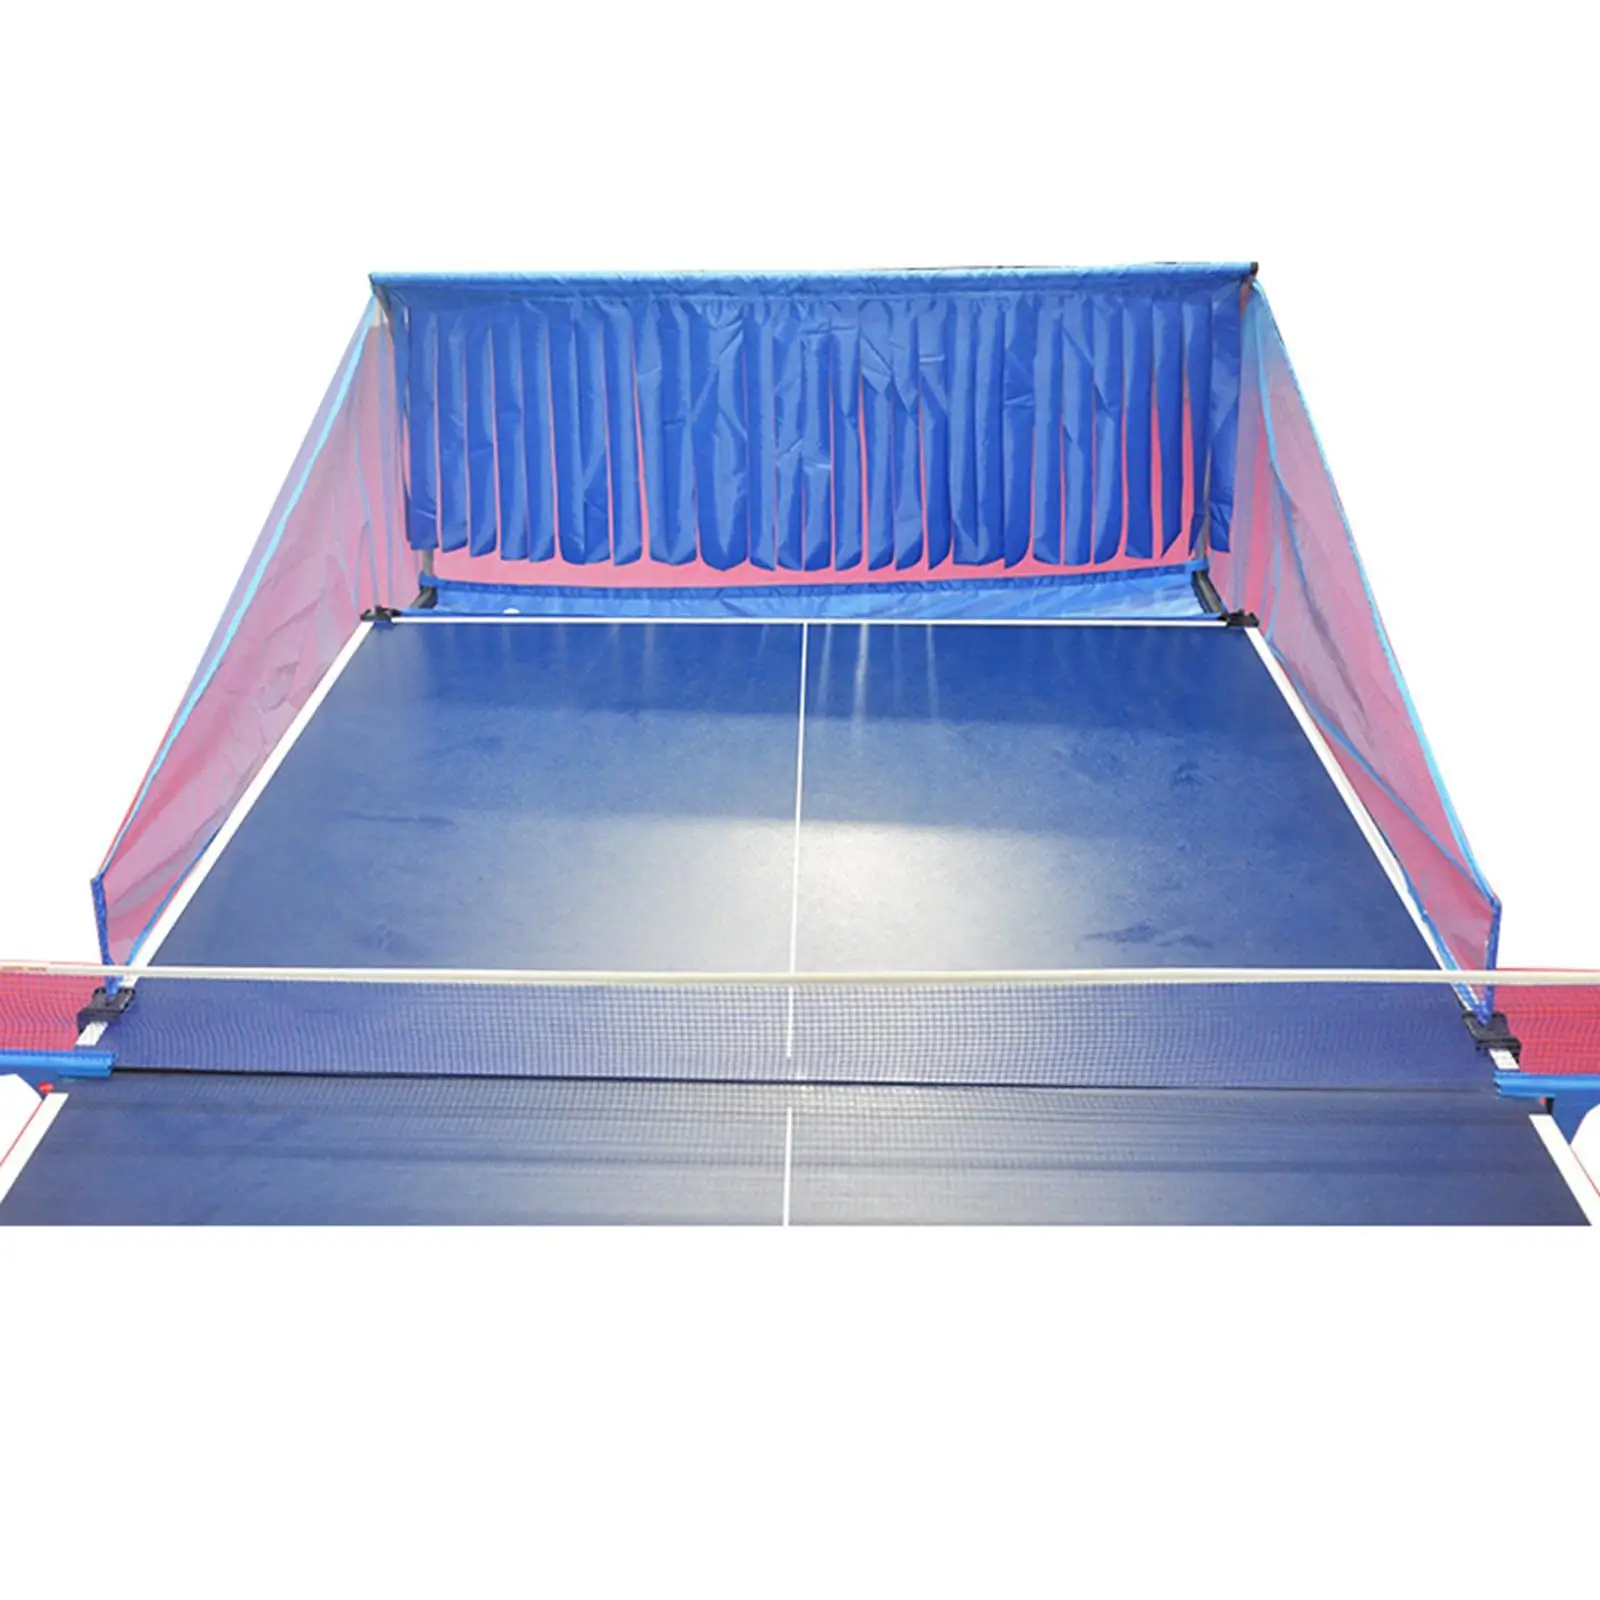 Table Tennis Ball Net Training Accessories Portable with Metal Frames Durable Professional Ping Pong Ball Collecting Net